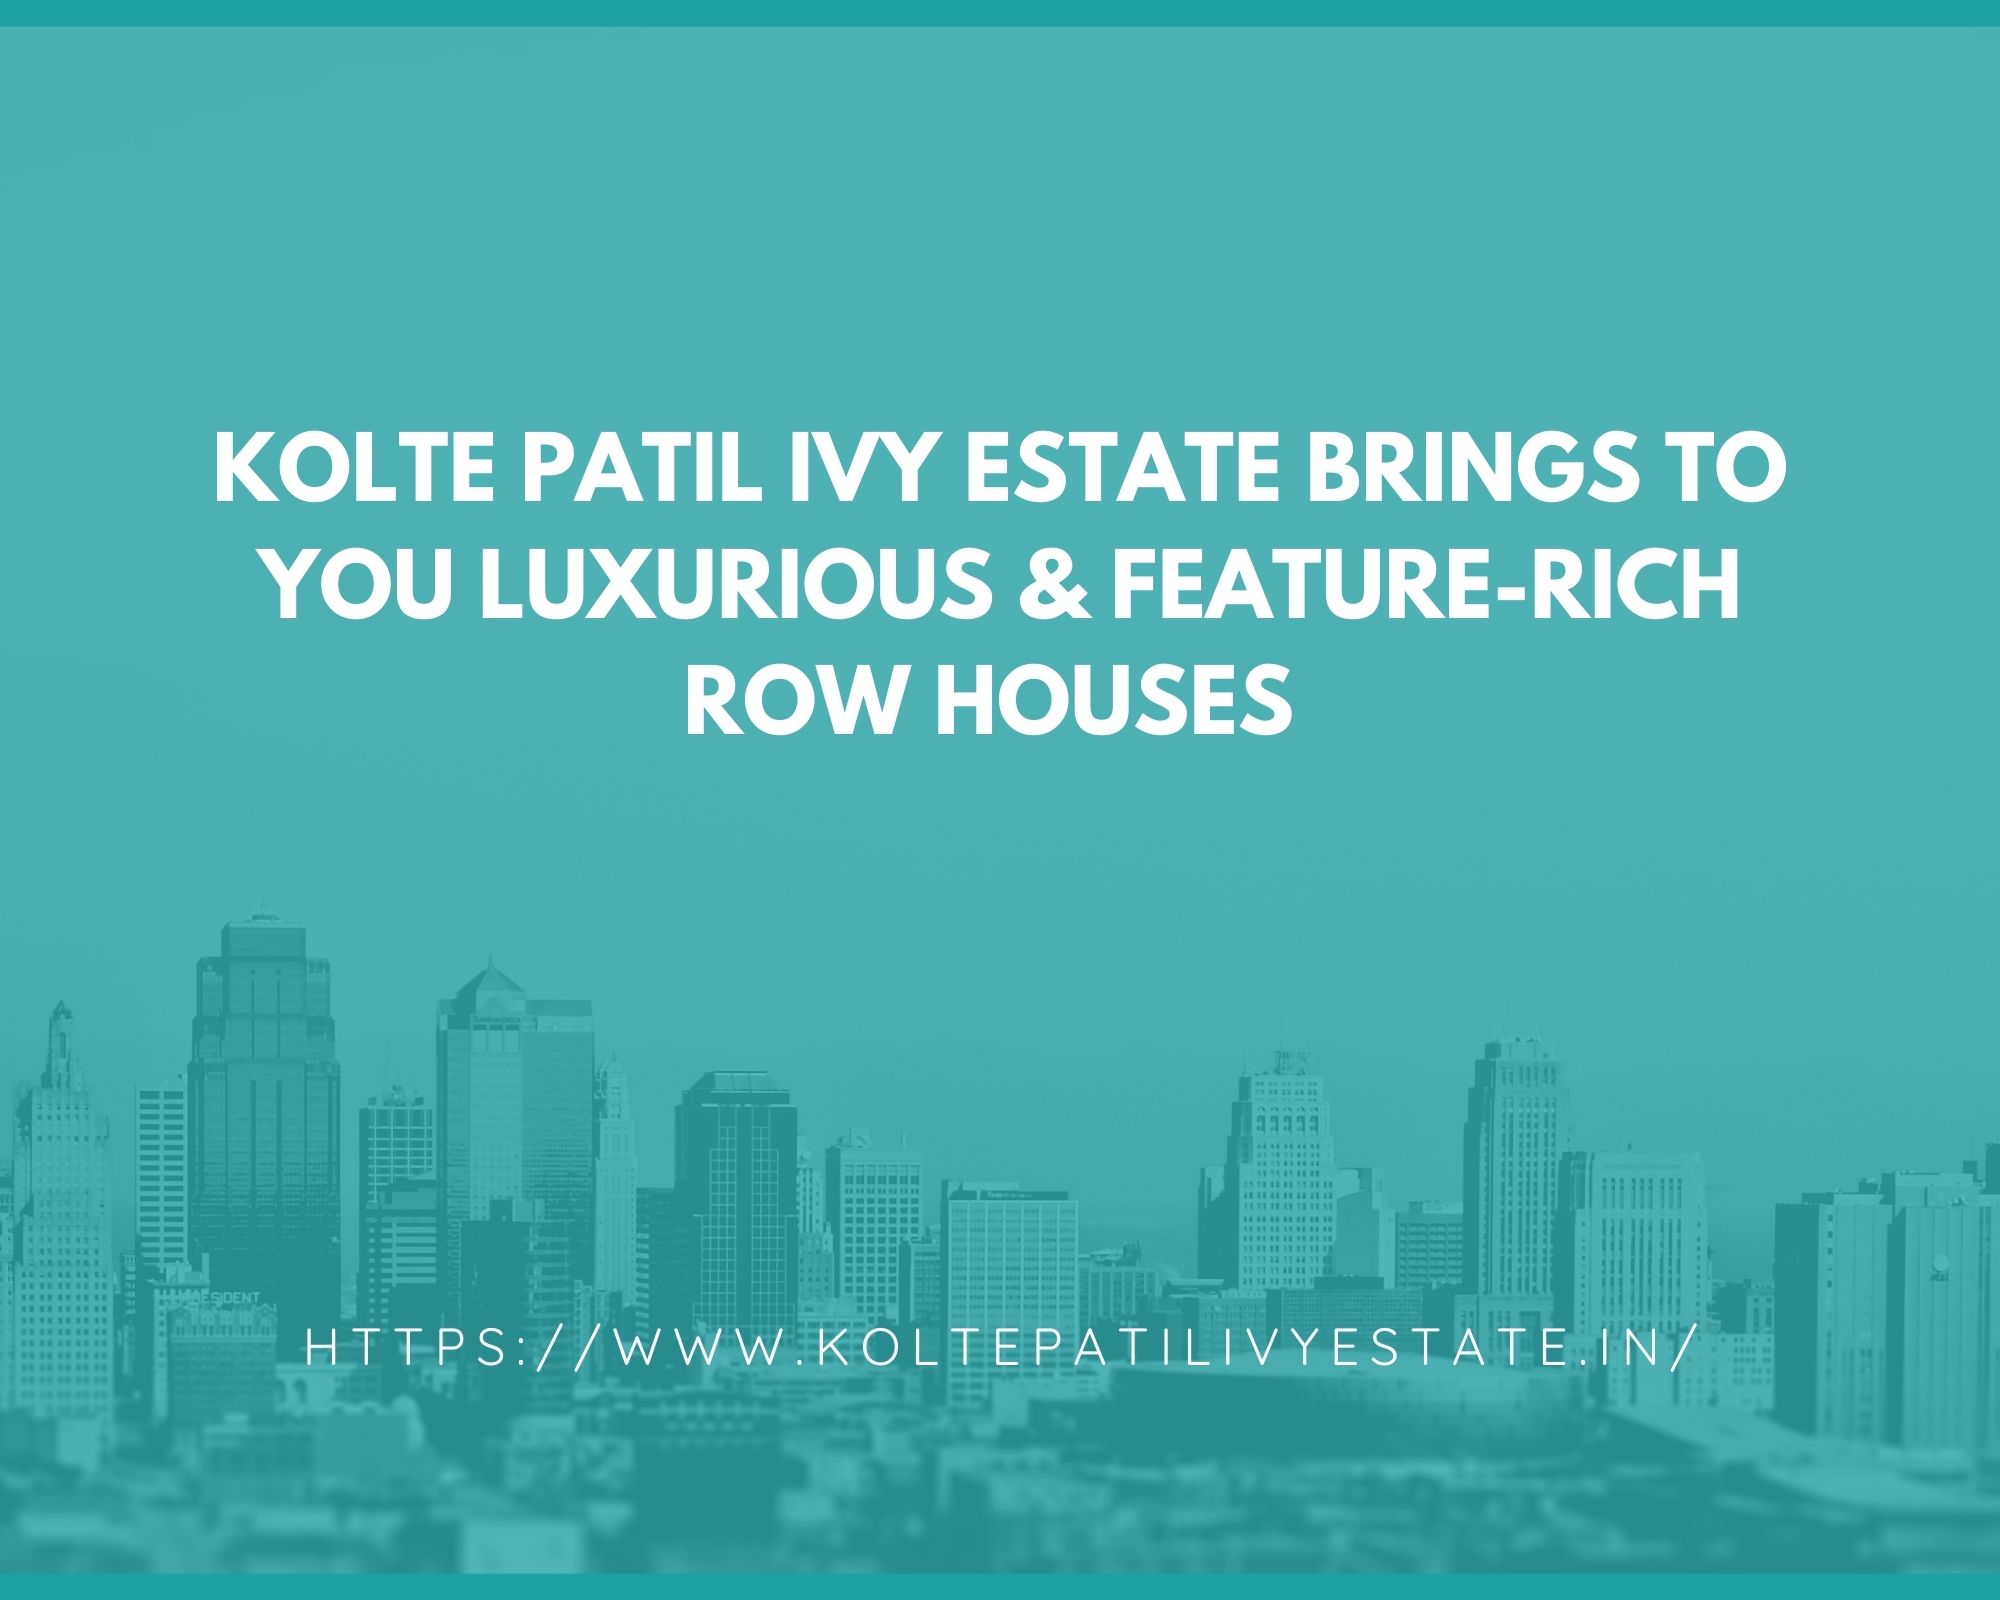 Kolte Patil Ivy Estate Brings To You Luxurious & Feature Rich Row Houses